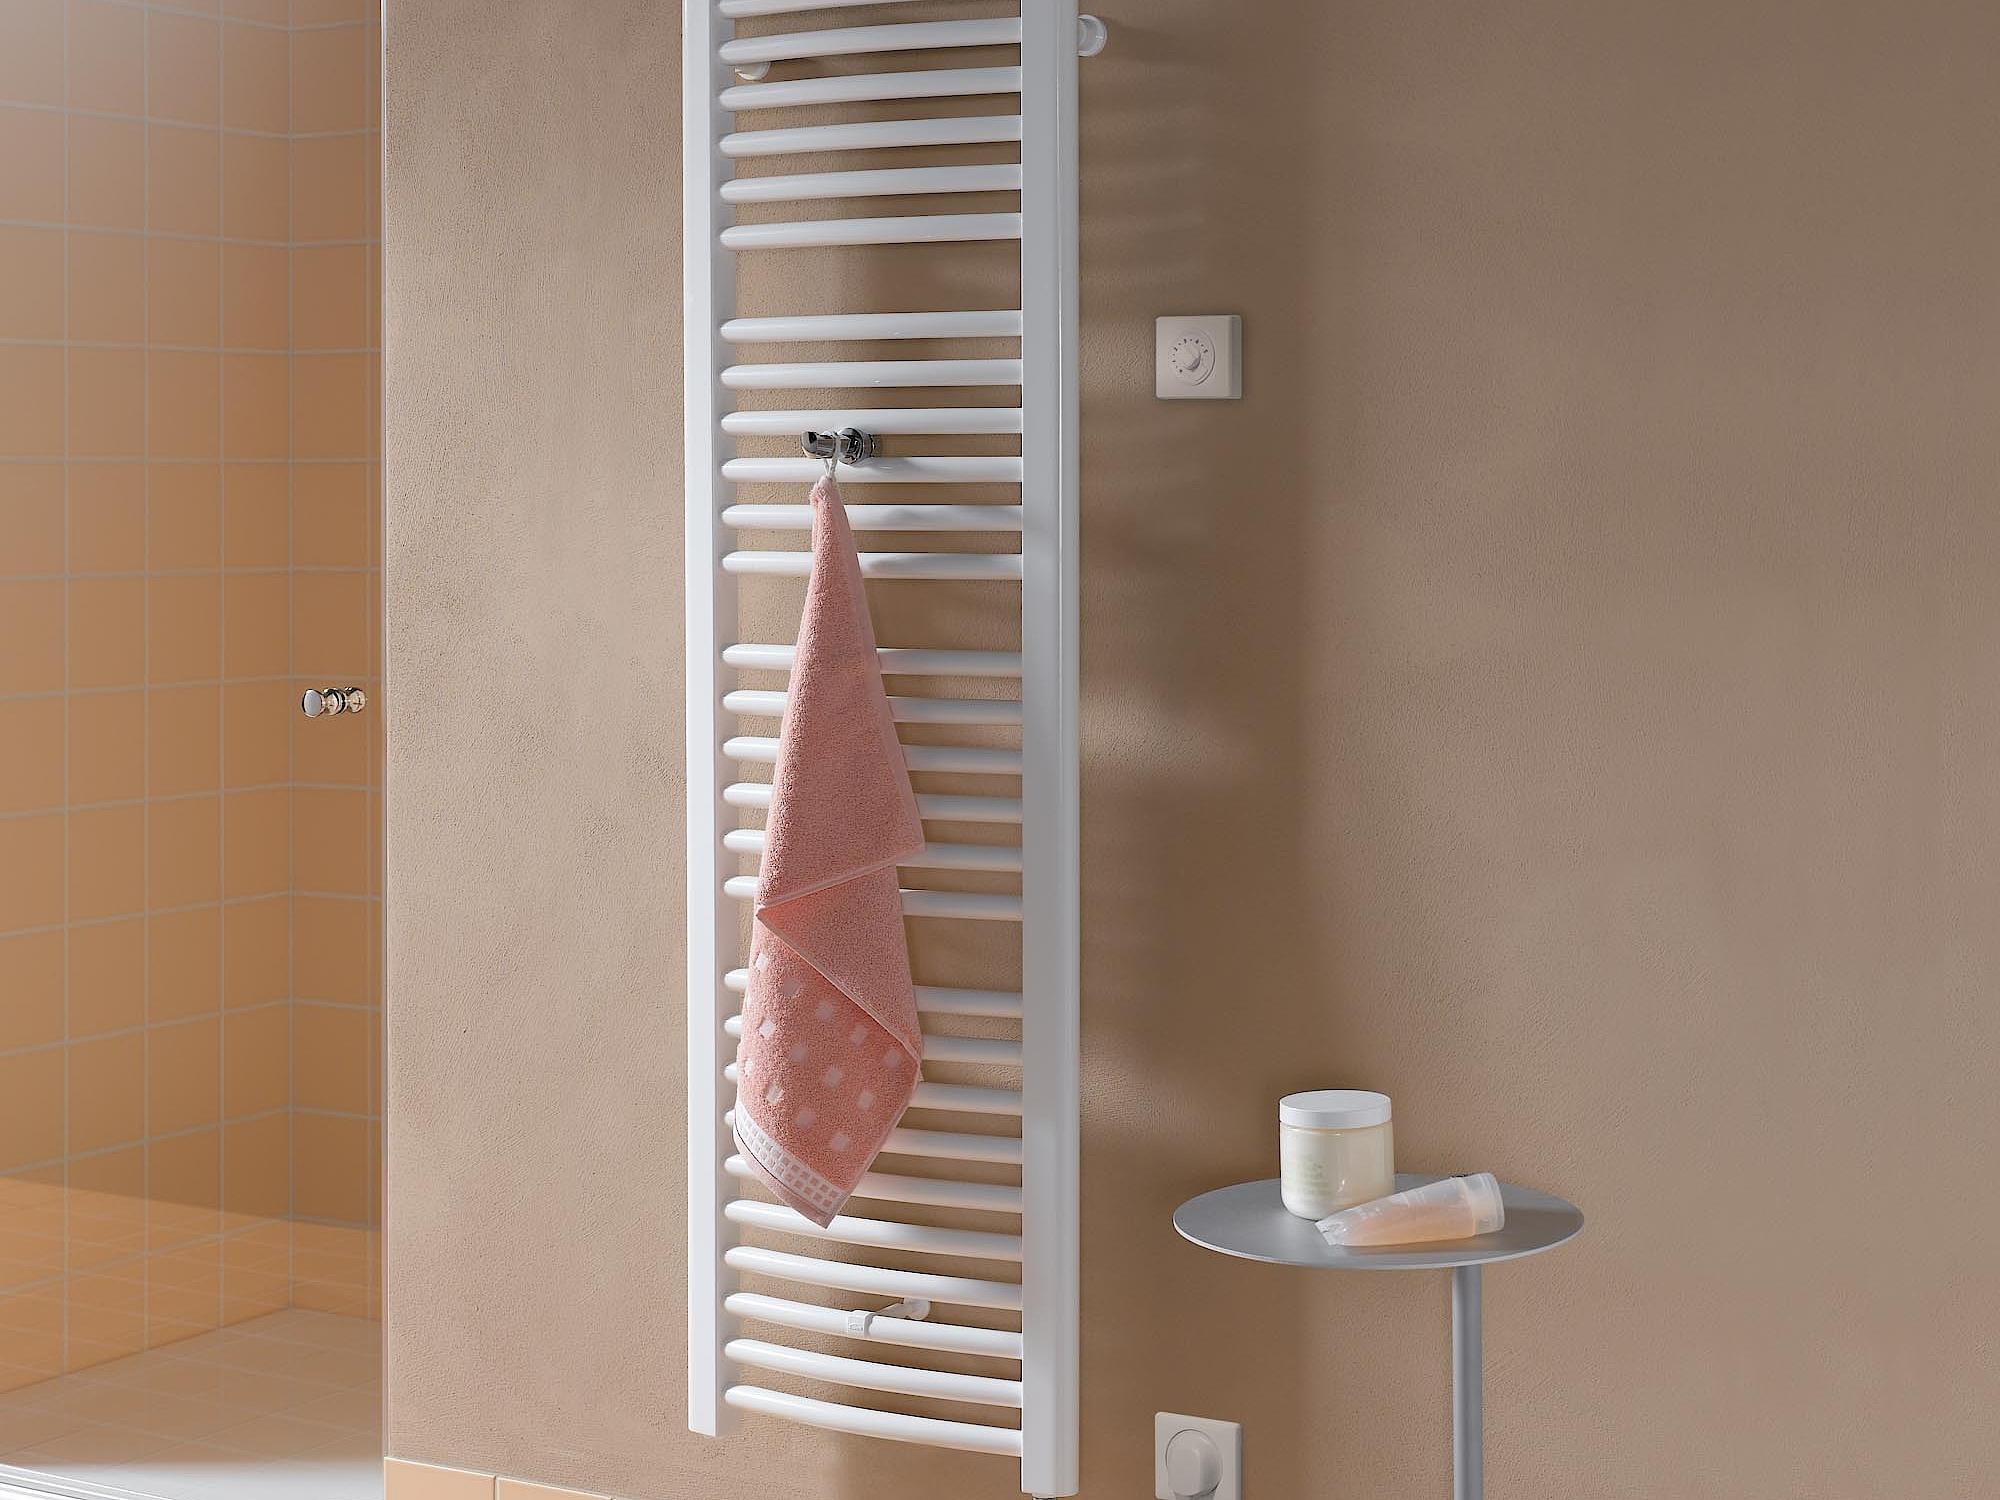 Kermi Basic-50 design and bathroom radiators also available in an electric version.